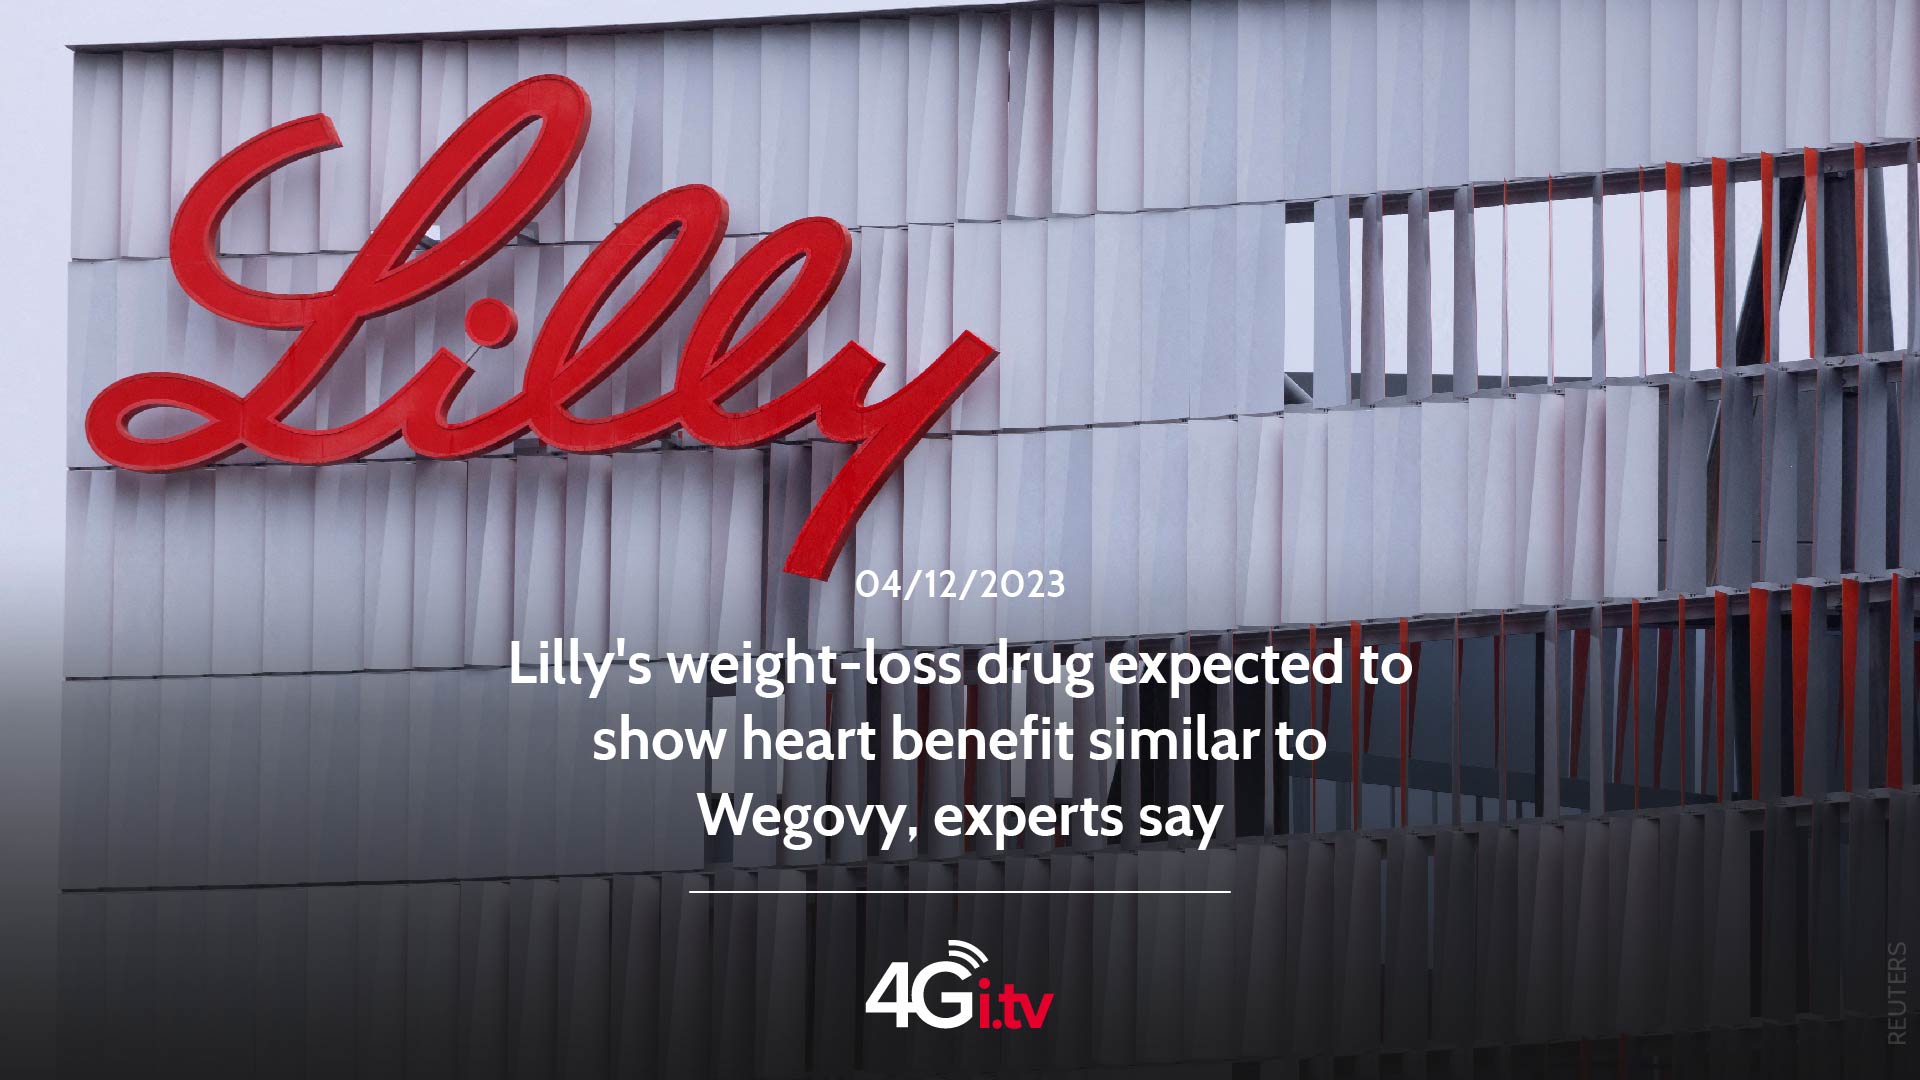 Lesen Sie mehr über den Artikel Lilly’s weight-loss drug expected to show heart benefit similar to Wegovy, experts say